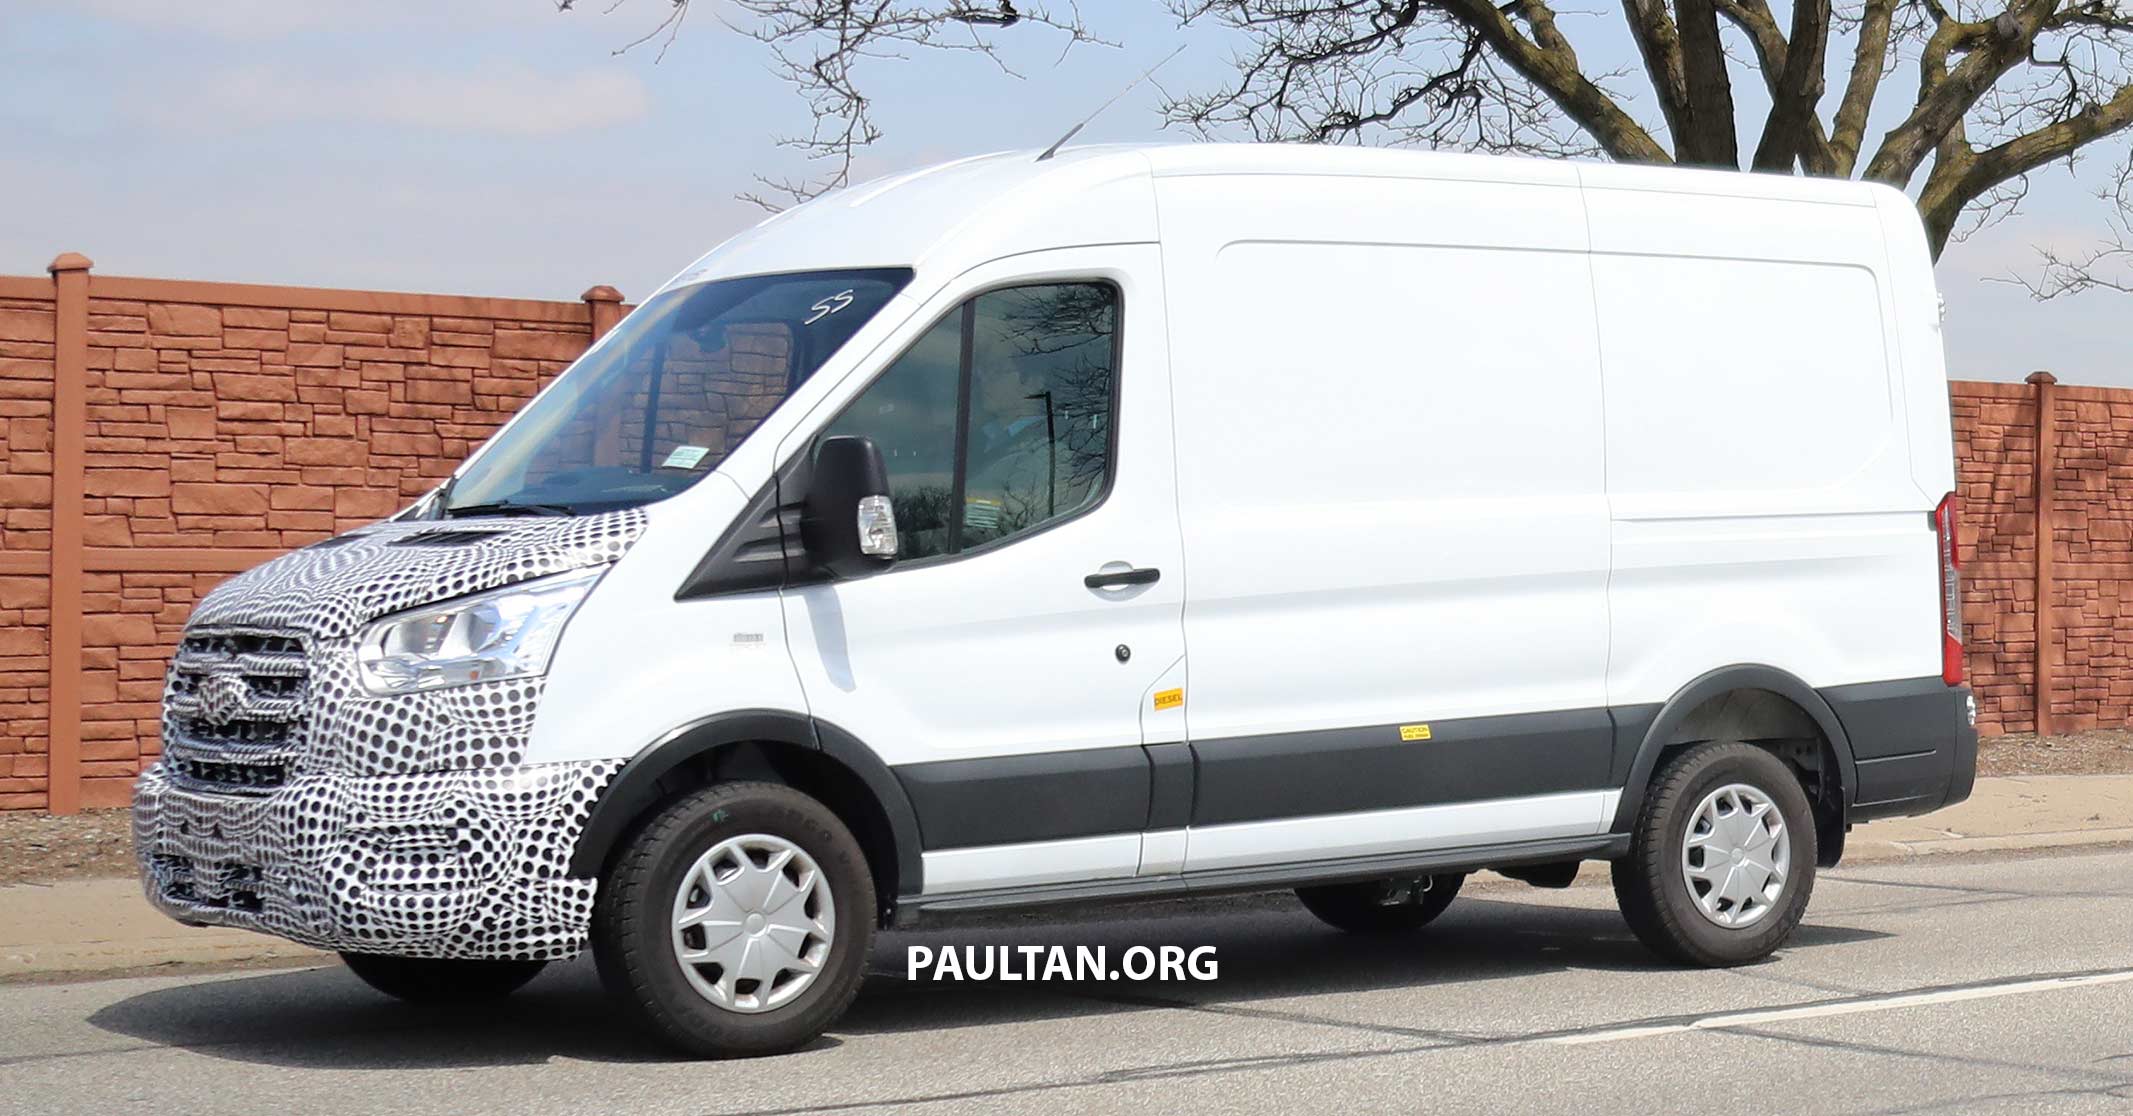 Форд транзит 2019г. Ford Transit 2019. Ford Transit van 2019. Ford Transit van 350. Форд Transit 2020.